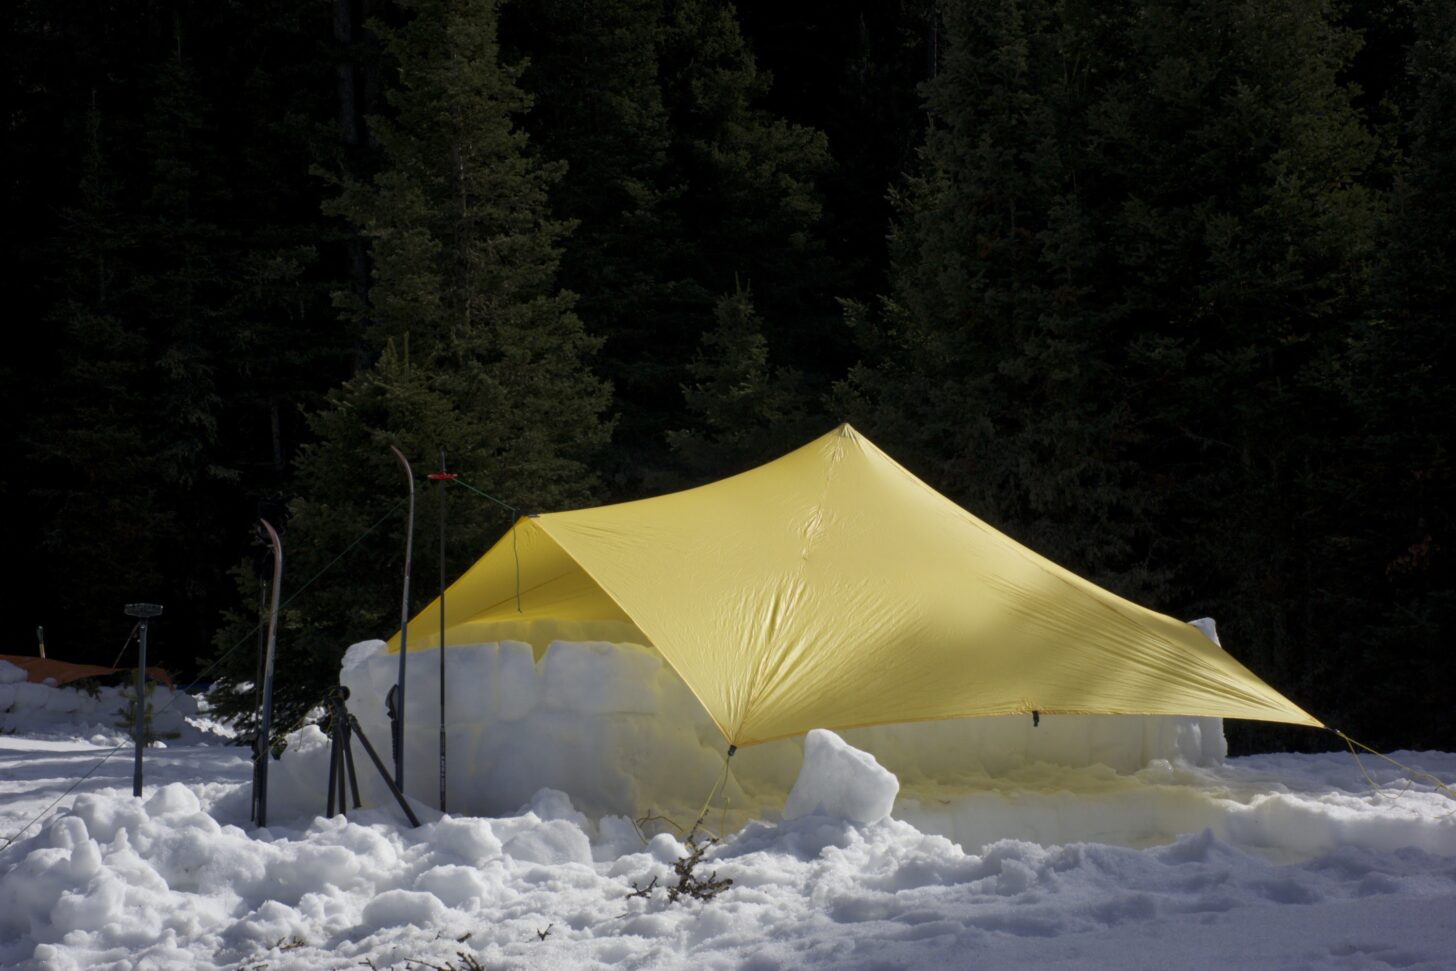 camping tarp pitched over a snowpit protected by snow block walls